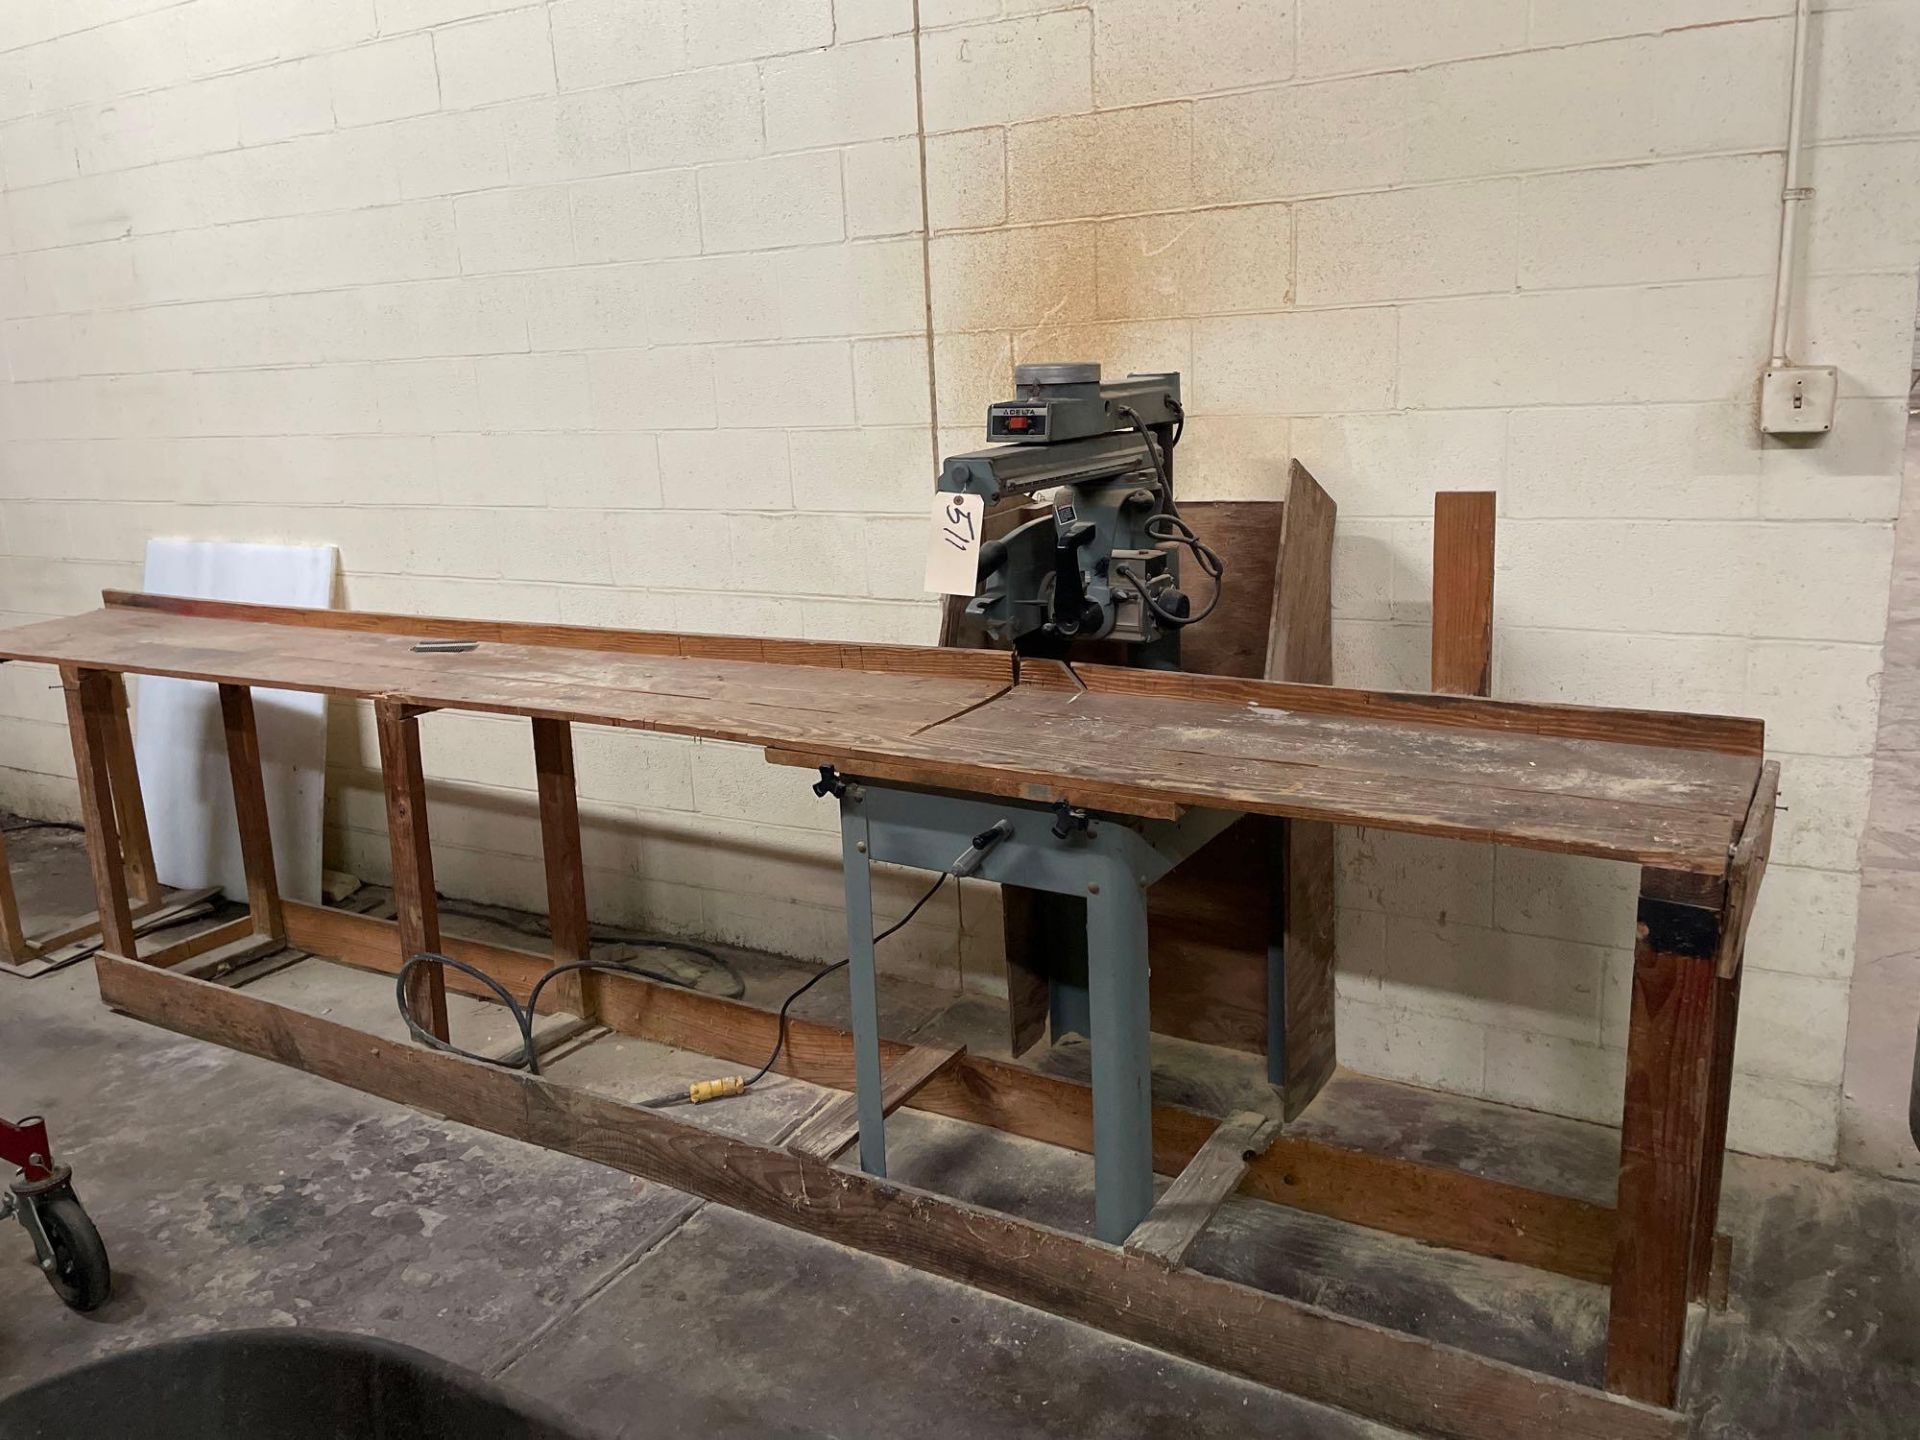 Delta 11” Table Saw with Custom Built Guiding Table 171” X 19”